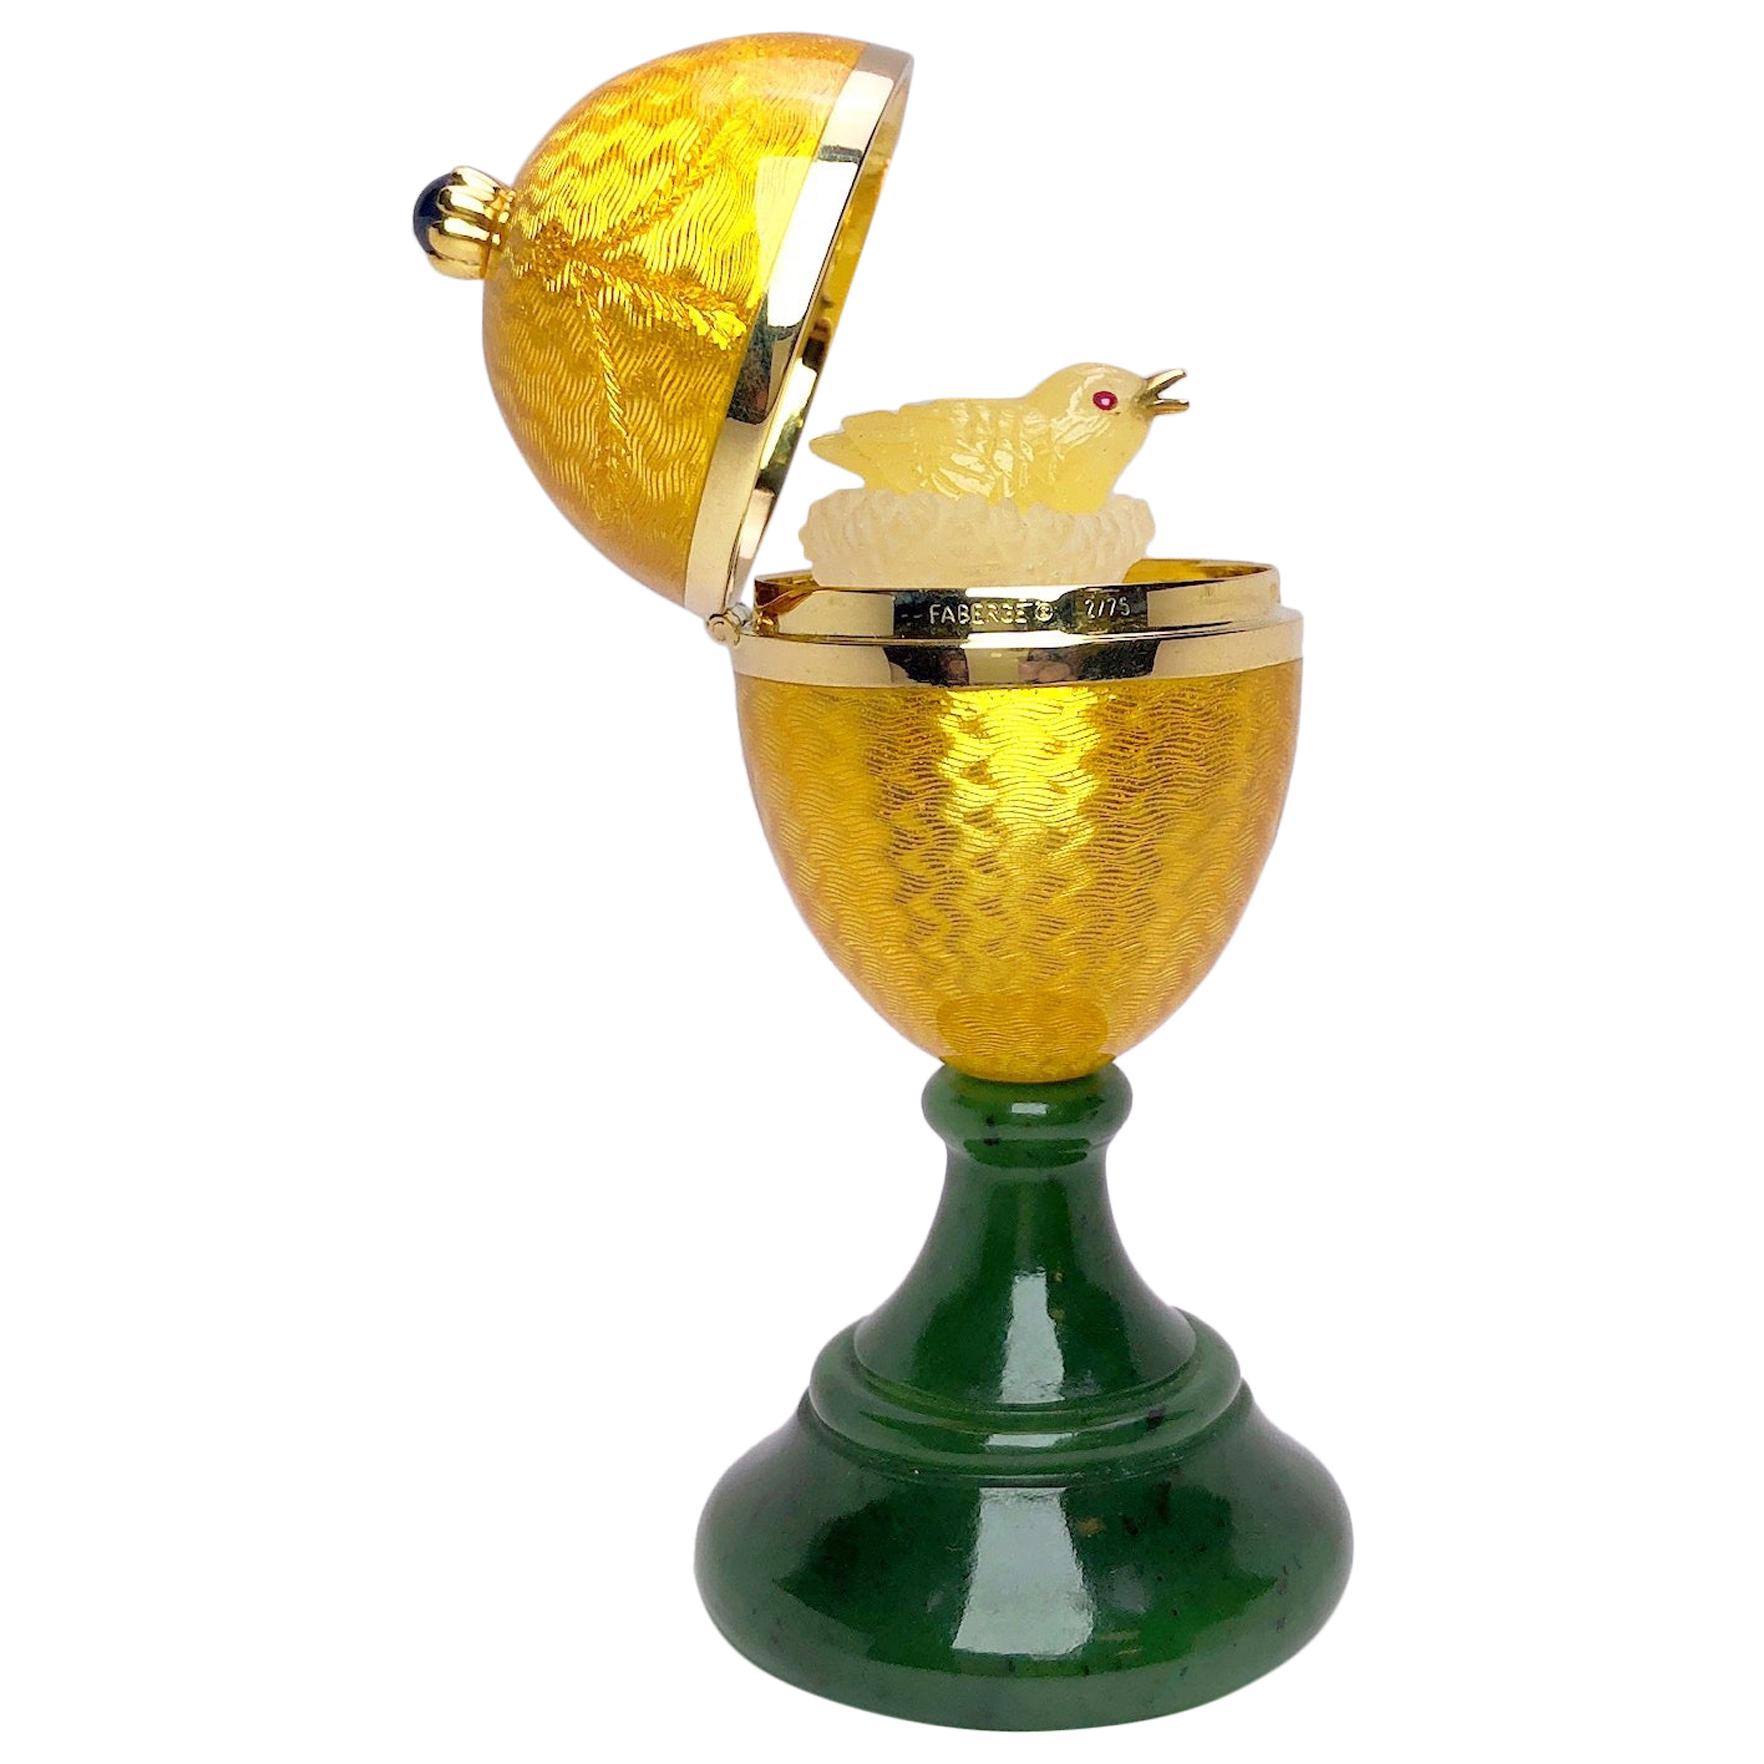 Modern Faberge Enamel and Yellow Gold Ltd. Edition Surprise Egg with Chick